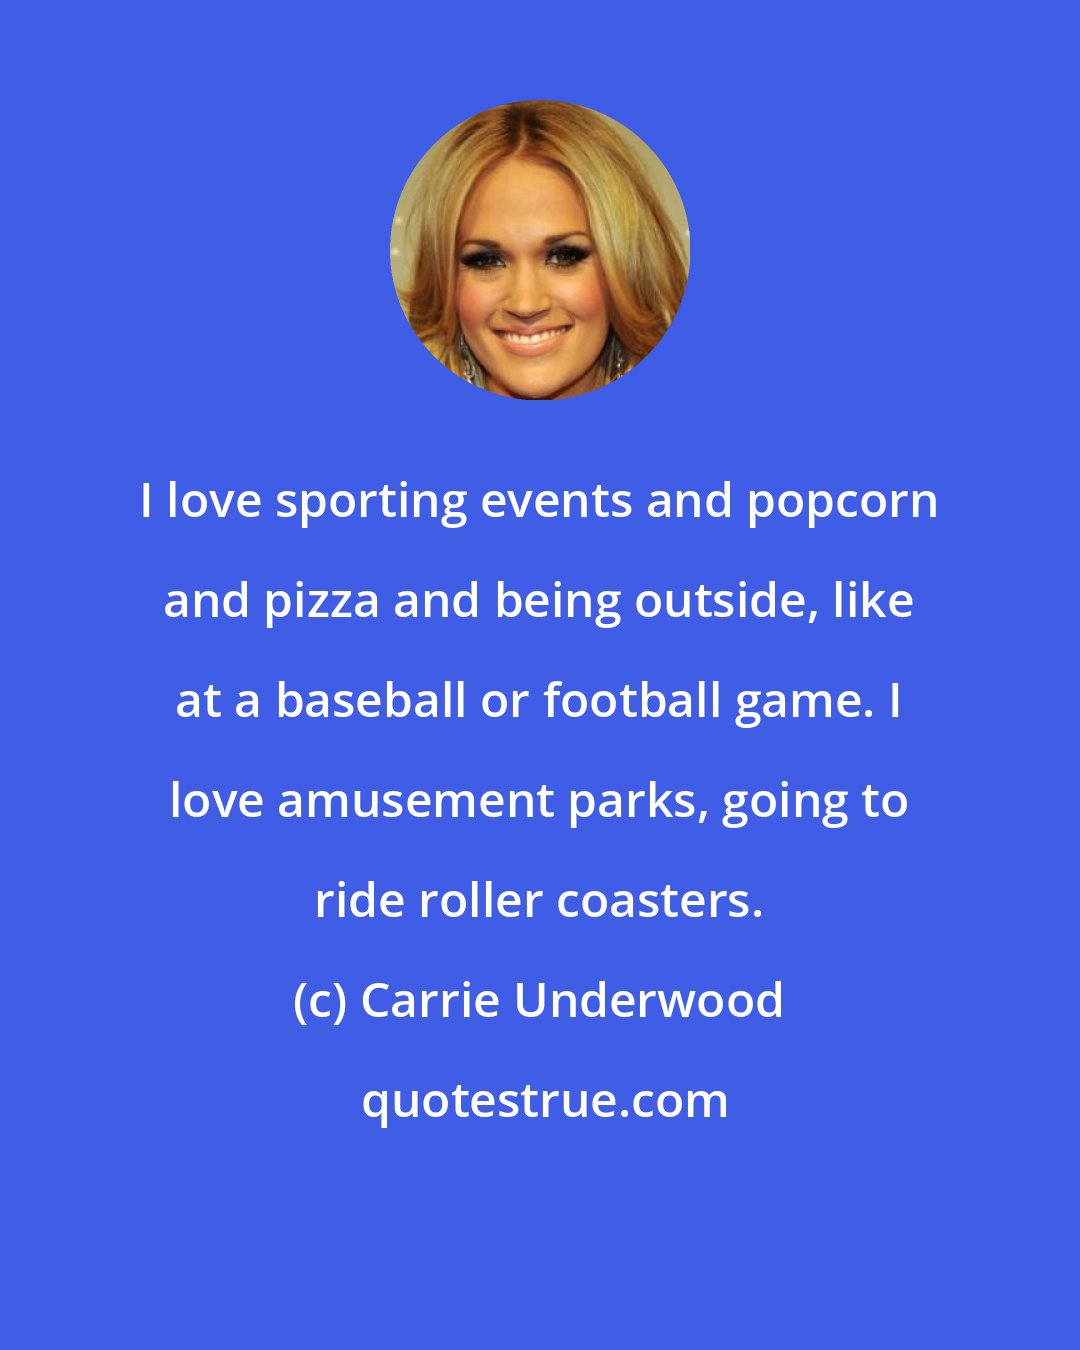 Carrie Underwood: I love sporting events and popcorn and pizza and being outside, like at a baseball or football game. I love amusement parks, going to ride roller coasters.